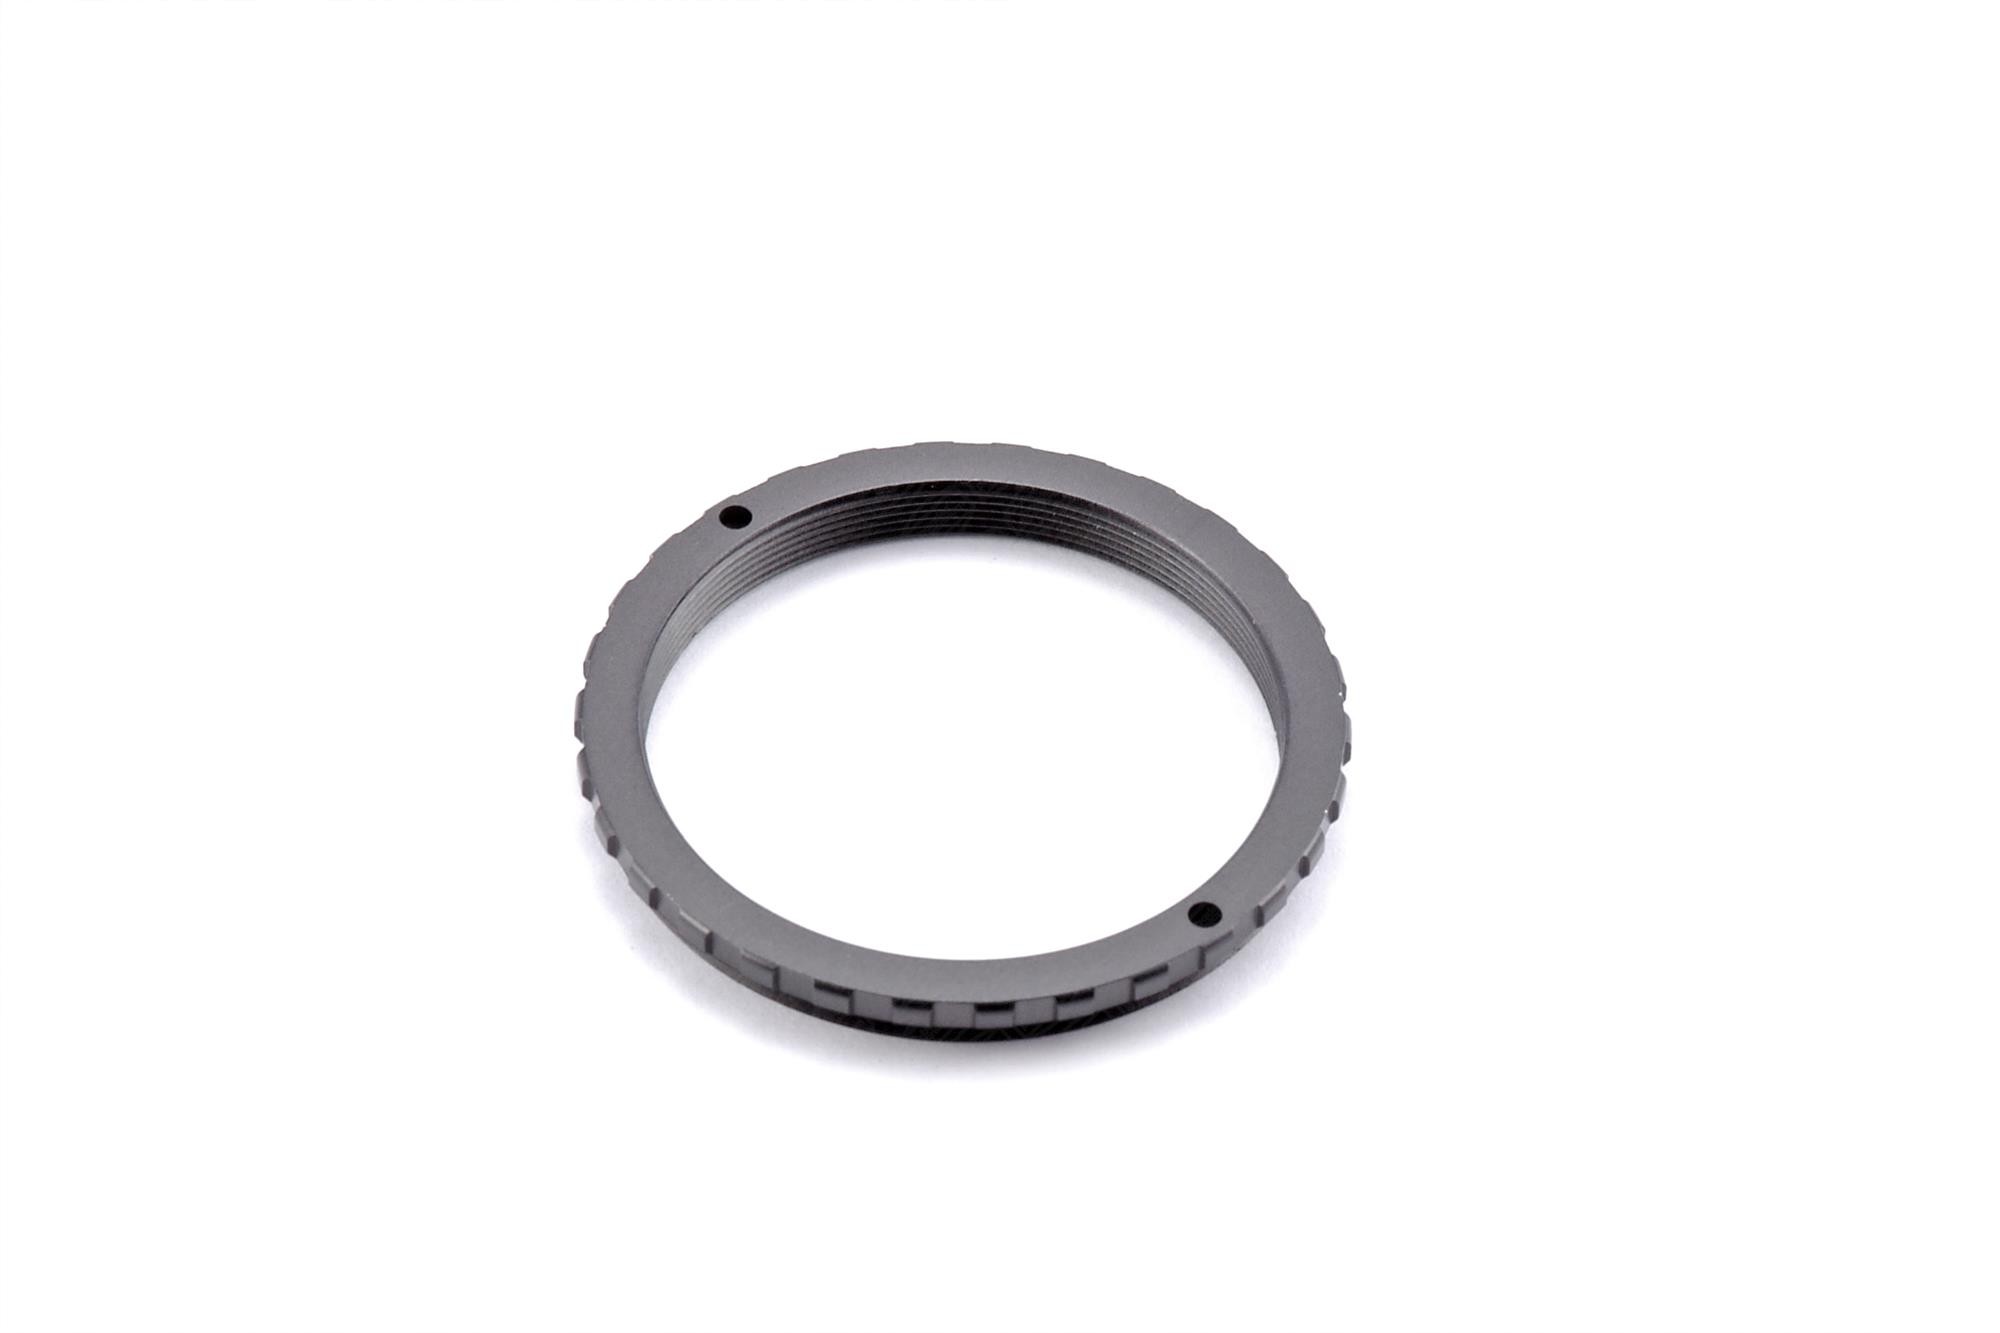 Baader Expanding Ring T-2f / M48m (T-2 part #29)